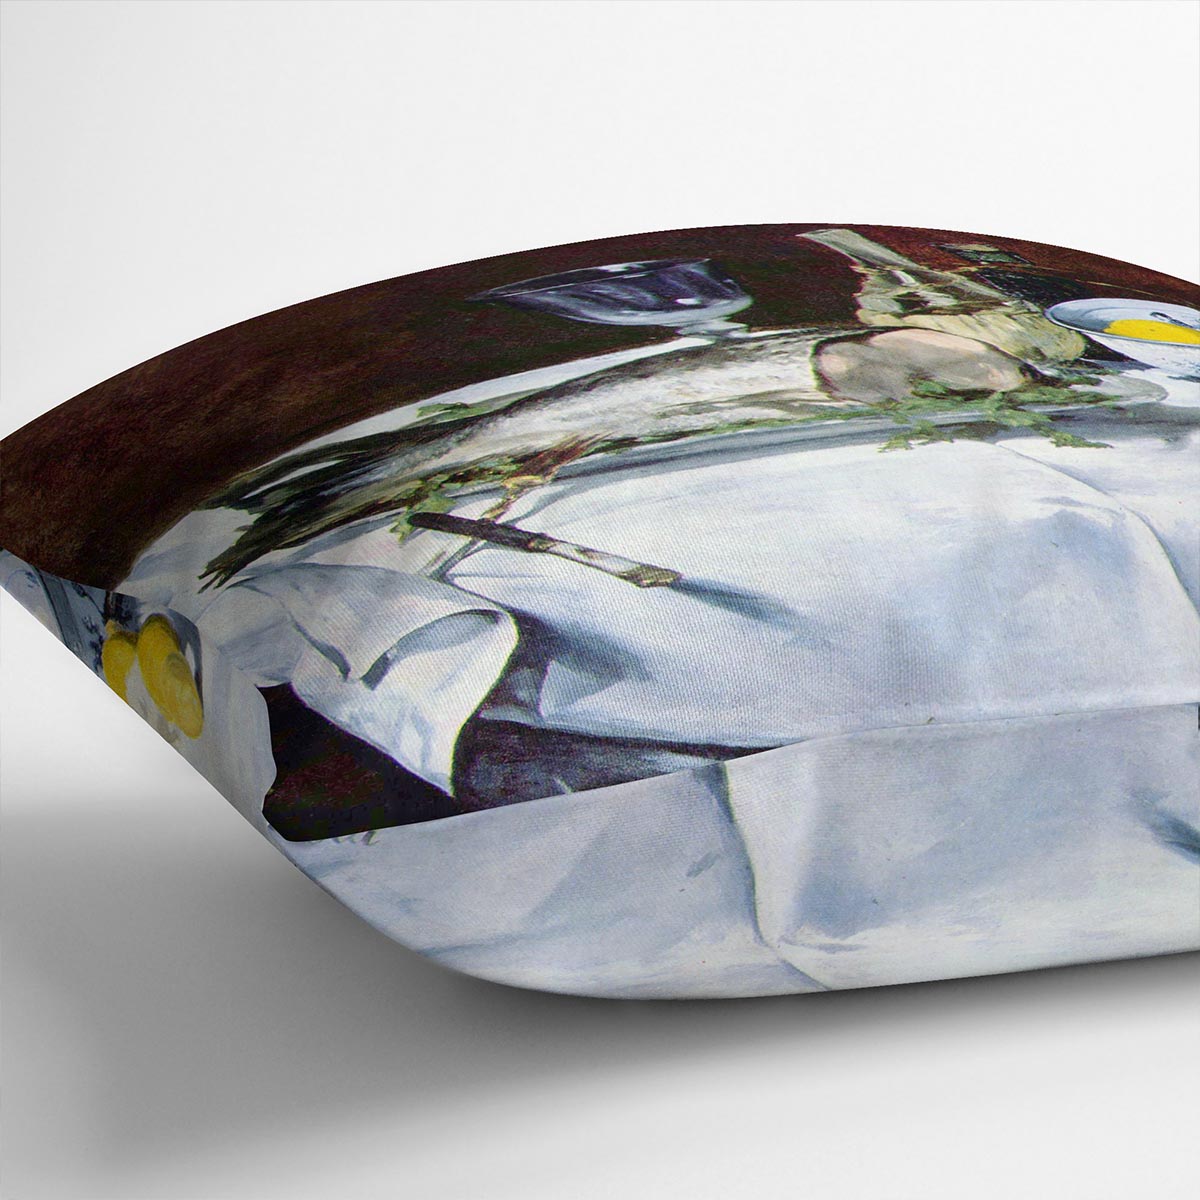 Still Life with Salmon by Manet Cushion